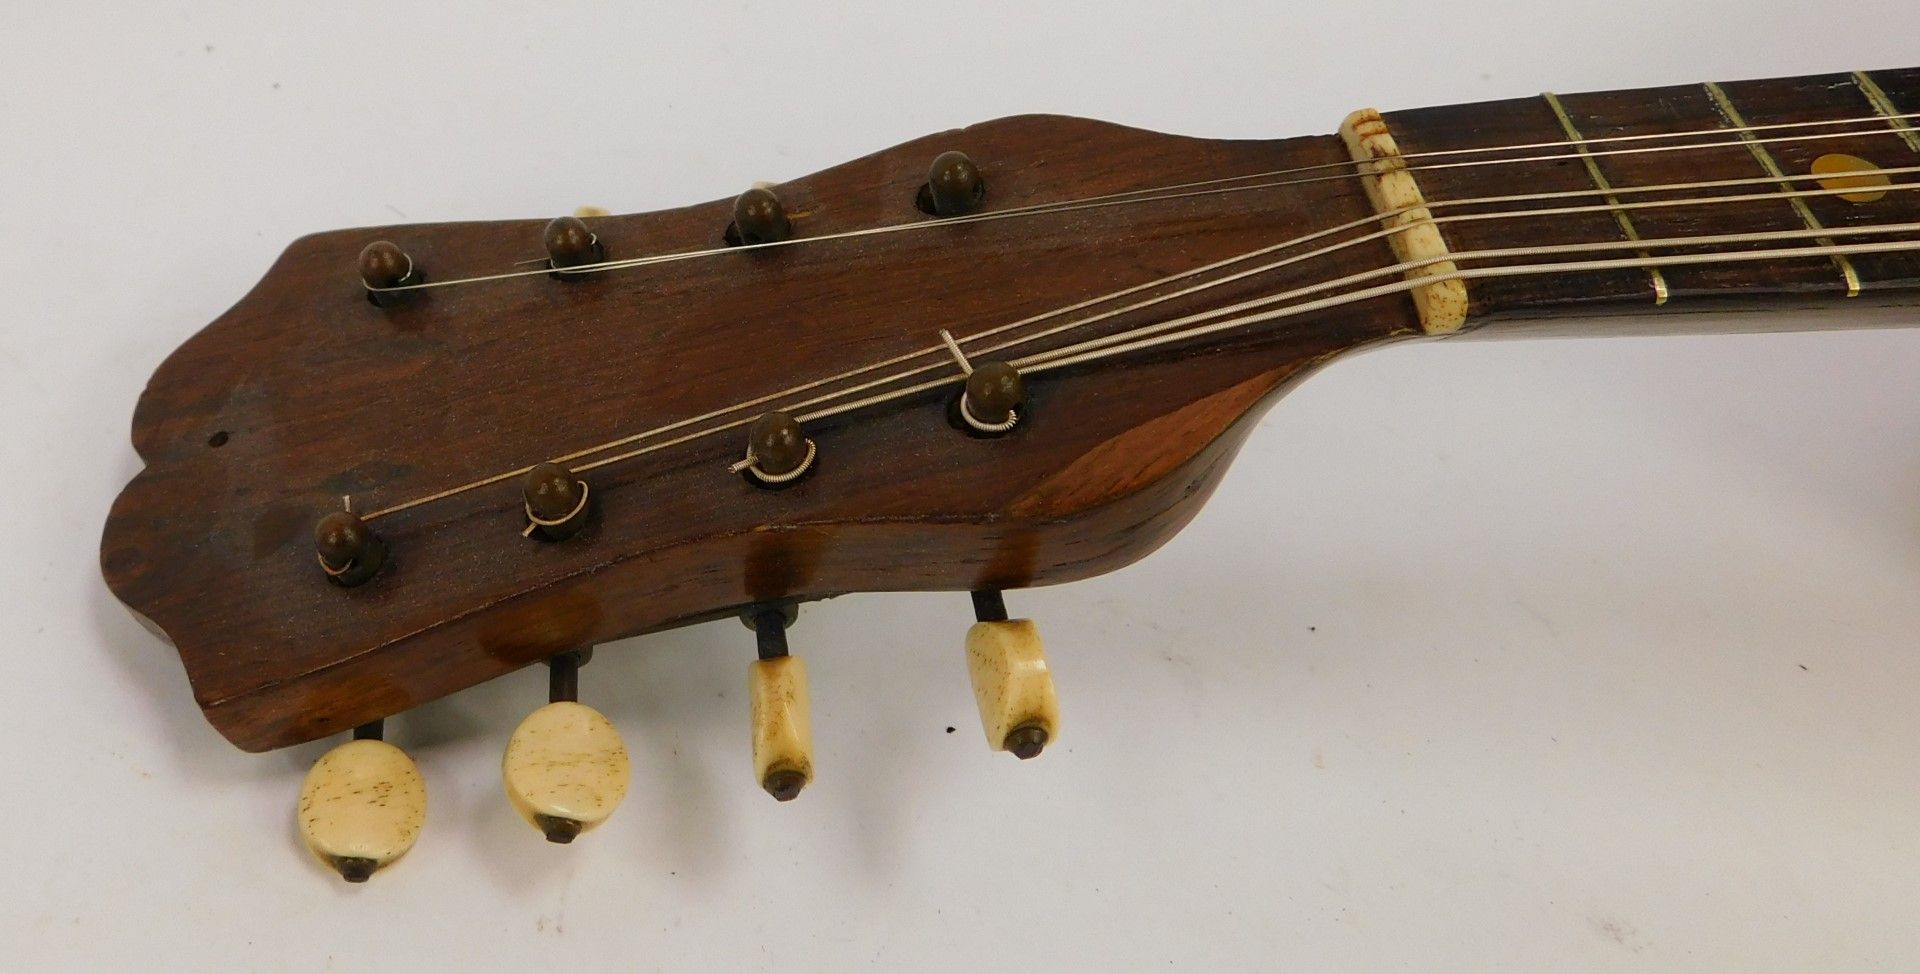 A Neopolitan mandolin, with tortoiseshell applied detail, with an ebonised stem and bone tuning pins - Image 4 of 8